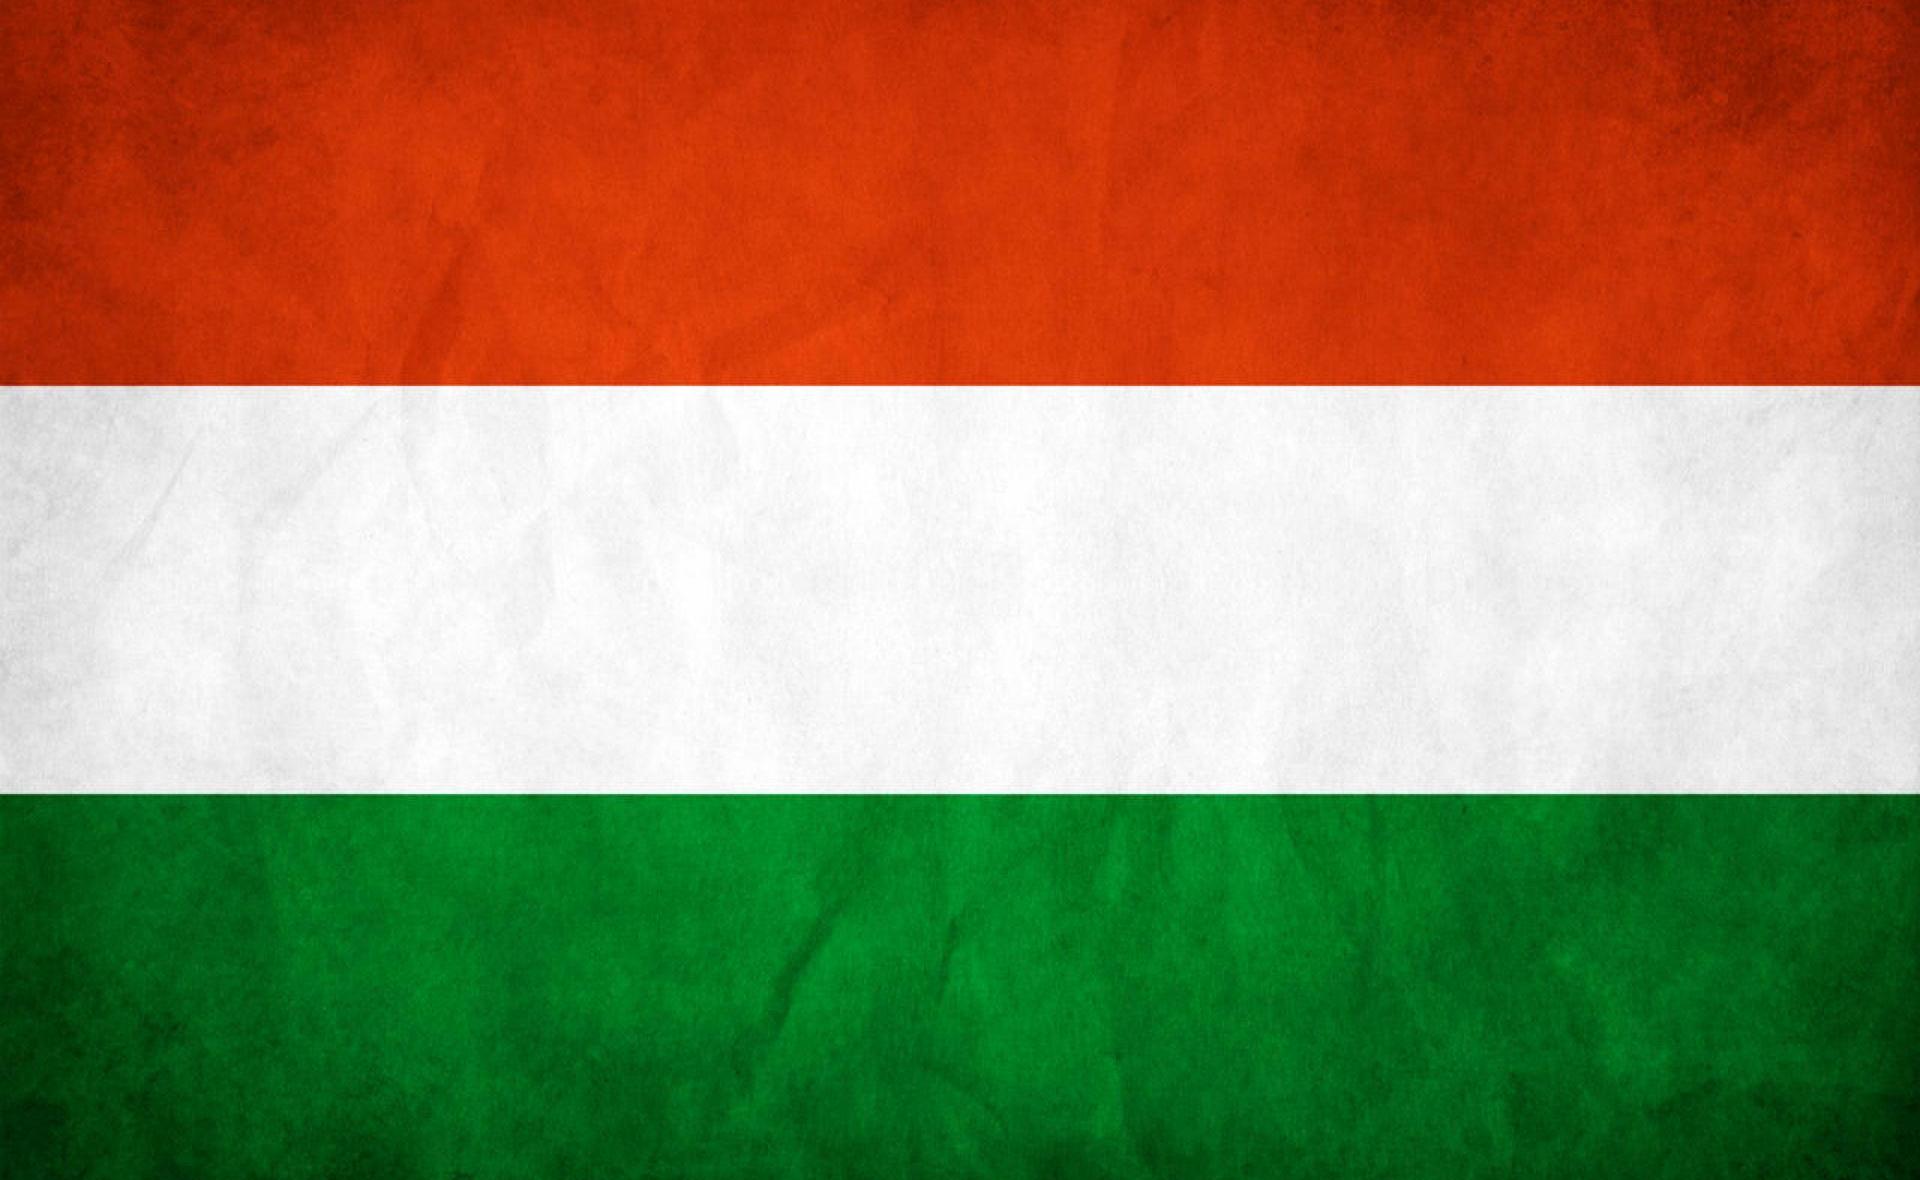 15th of March, commemoration of the Hungarian revolution in 1848